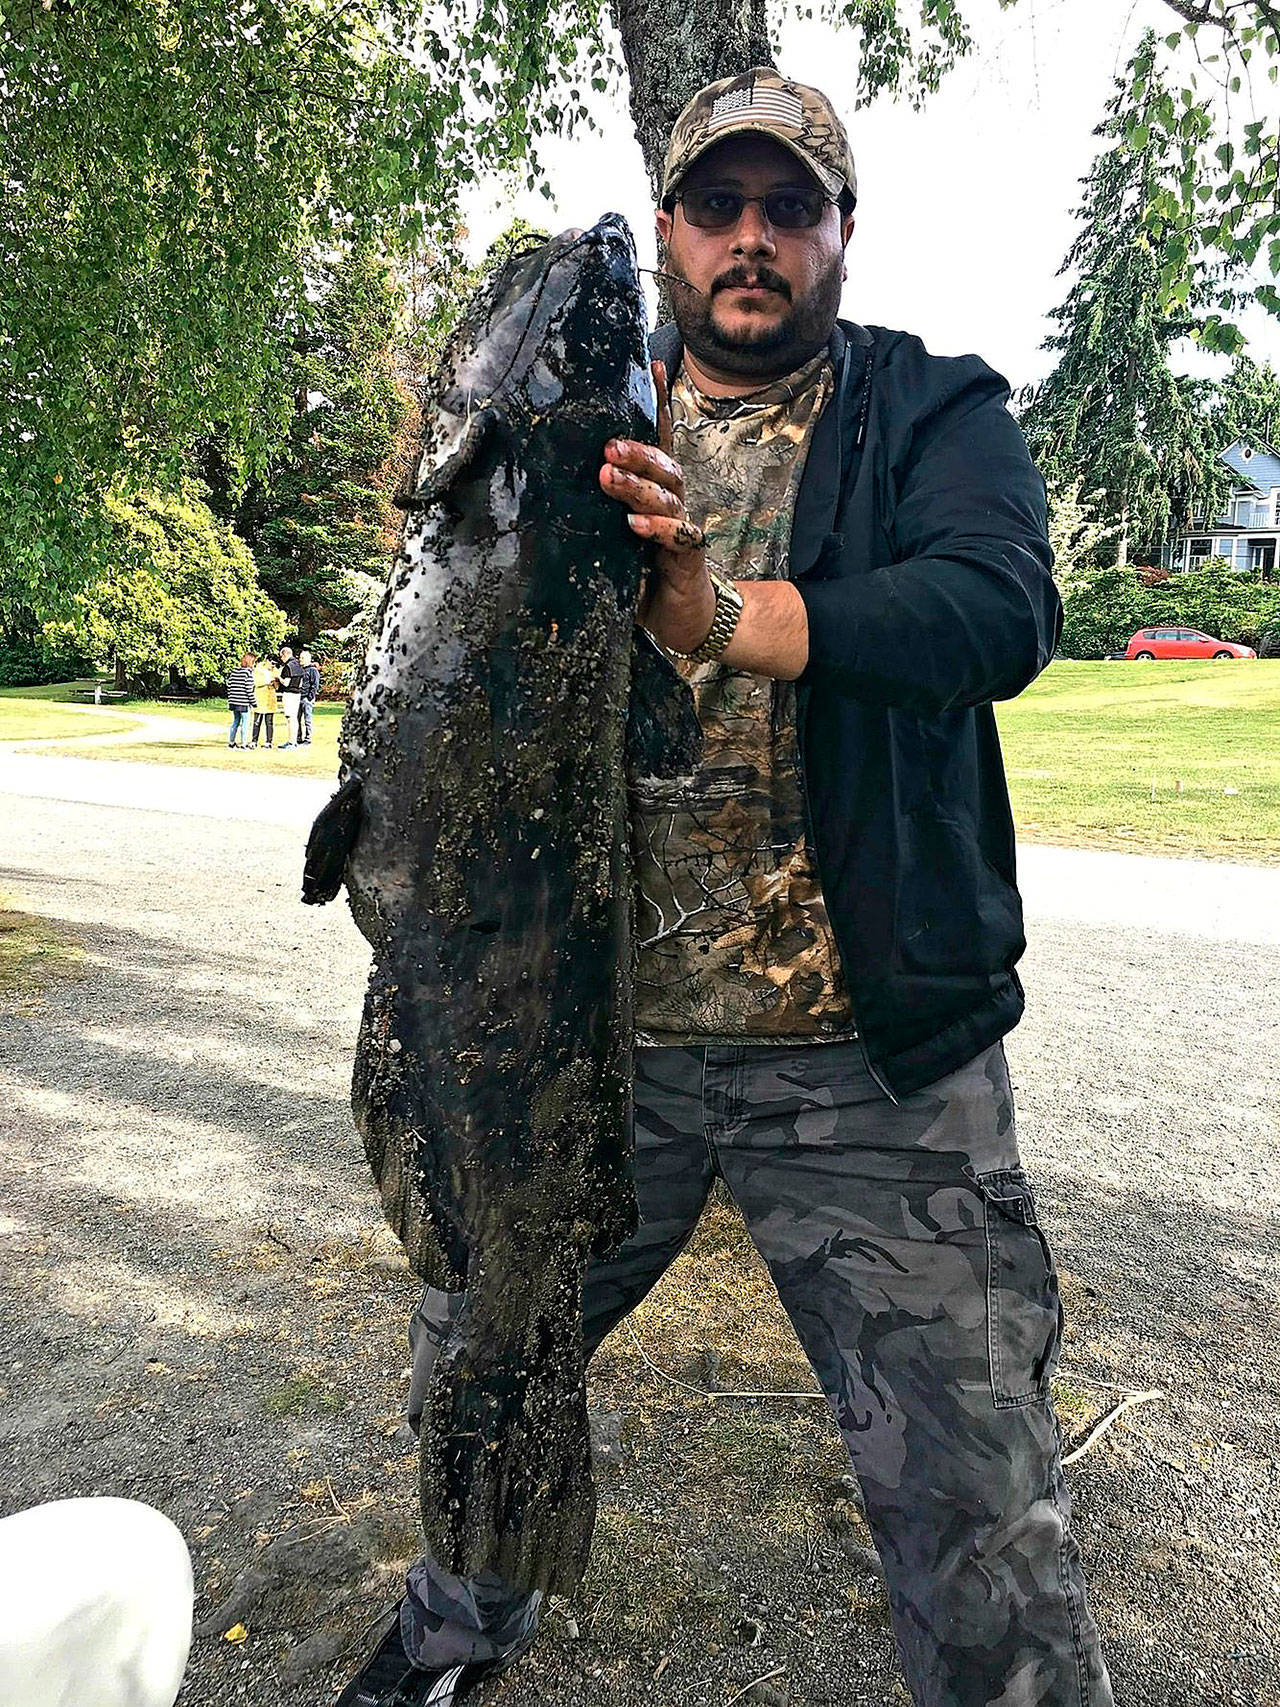 Ahmed Majeed shows off his catch of a huge catfish on Saturday at Green Lake. (Photo courtesy of Ahmed Majeed)